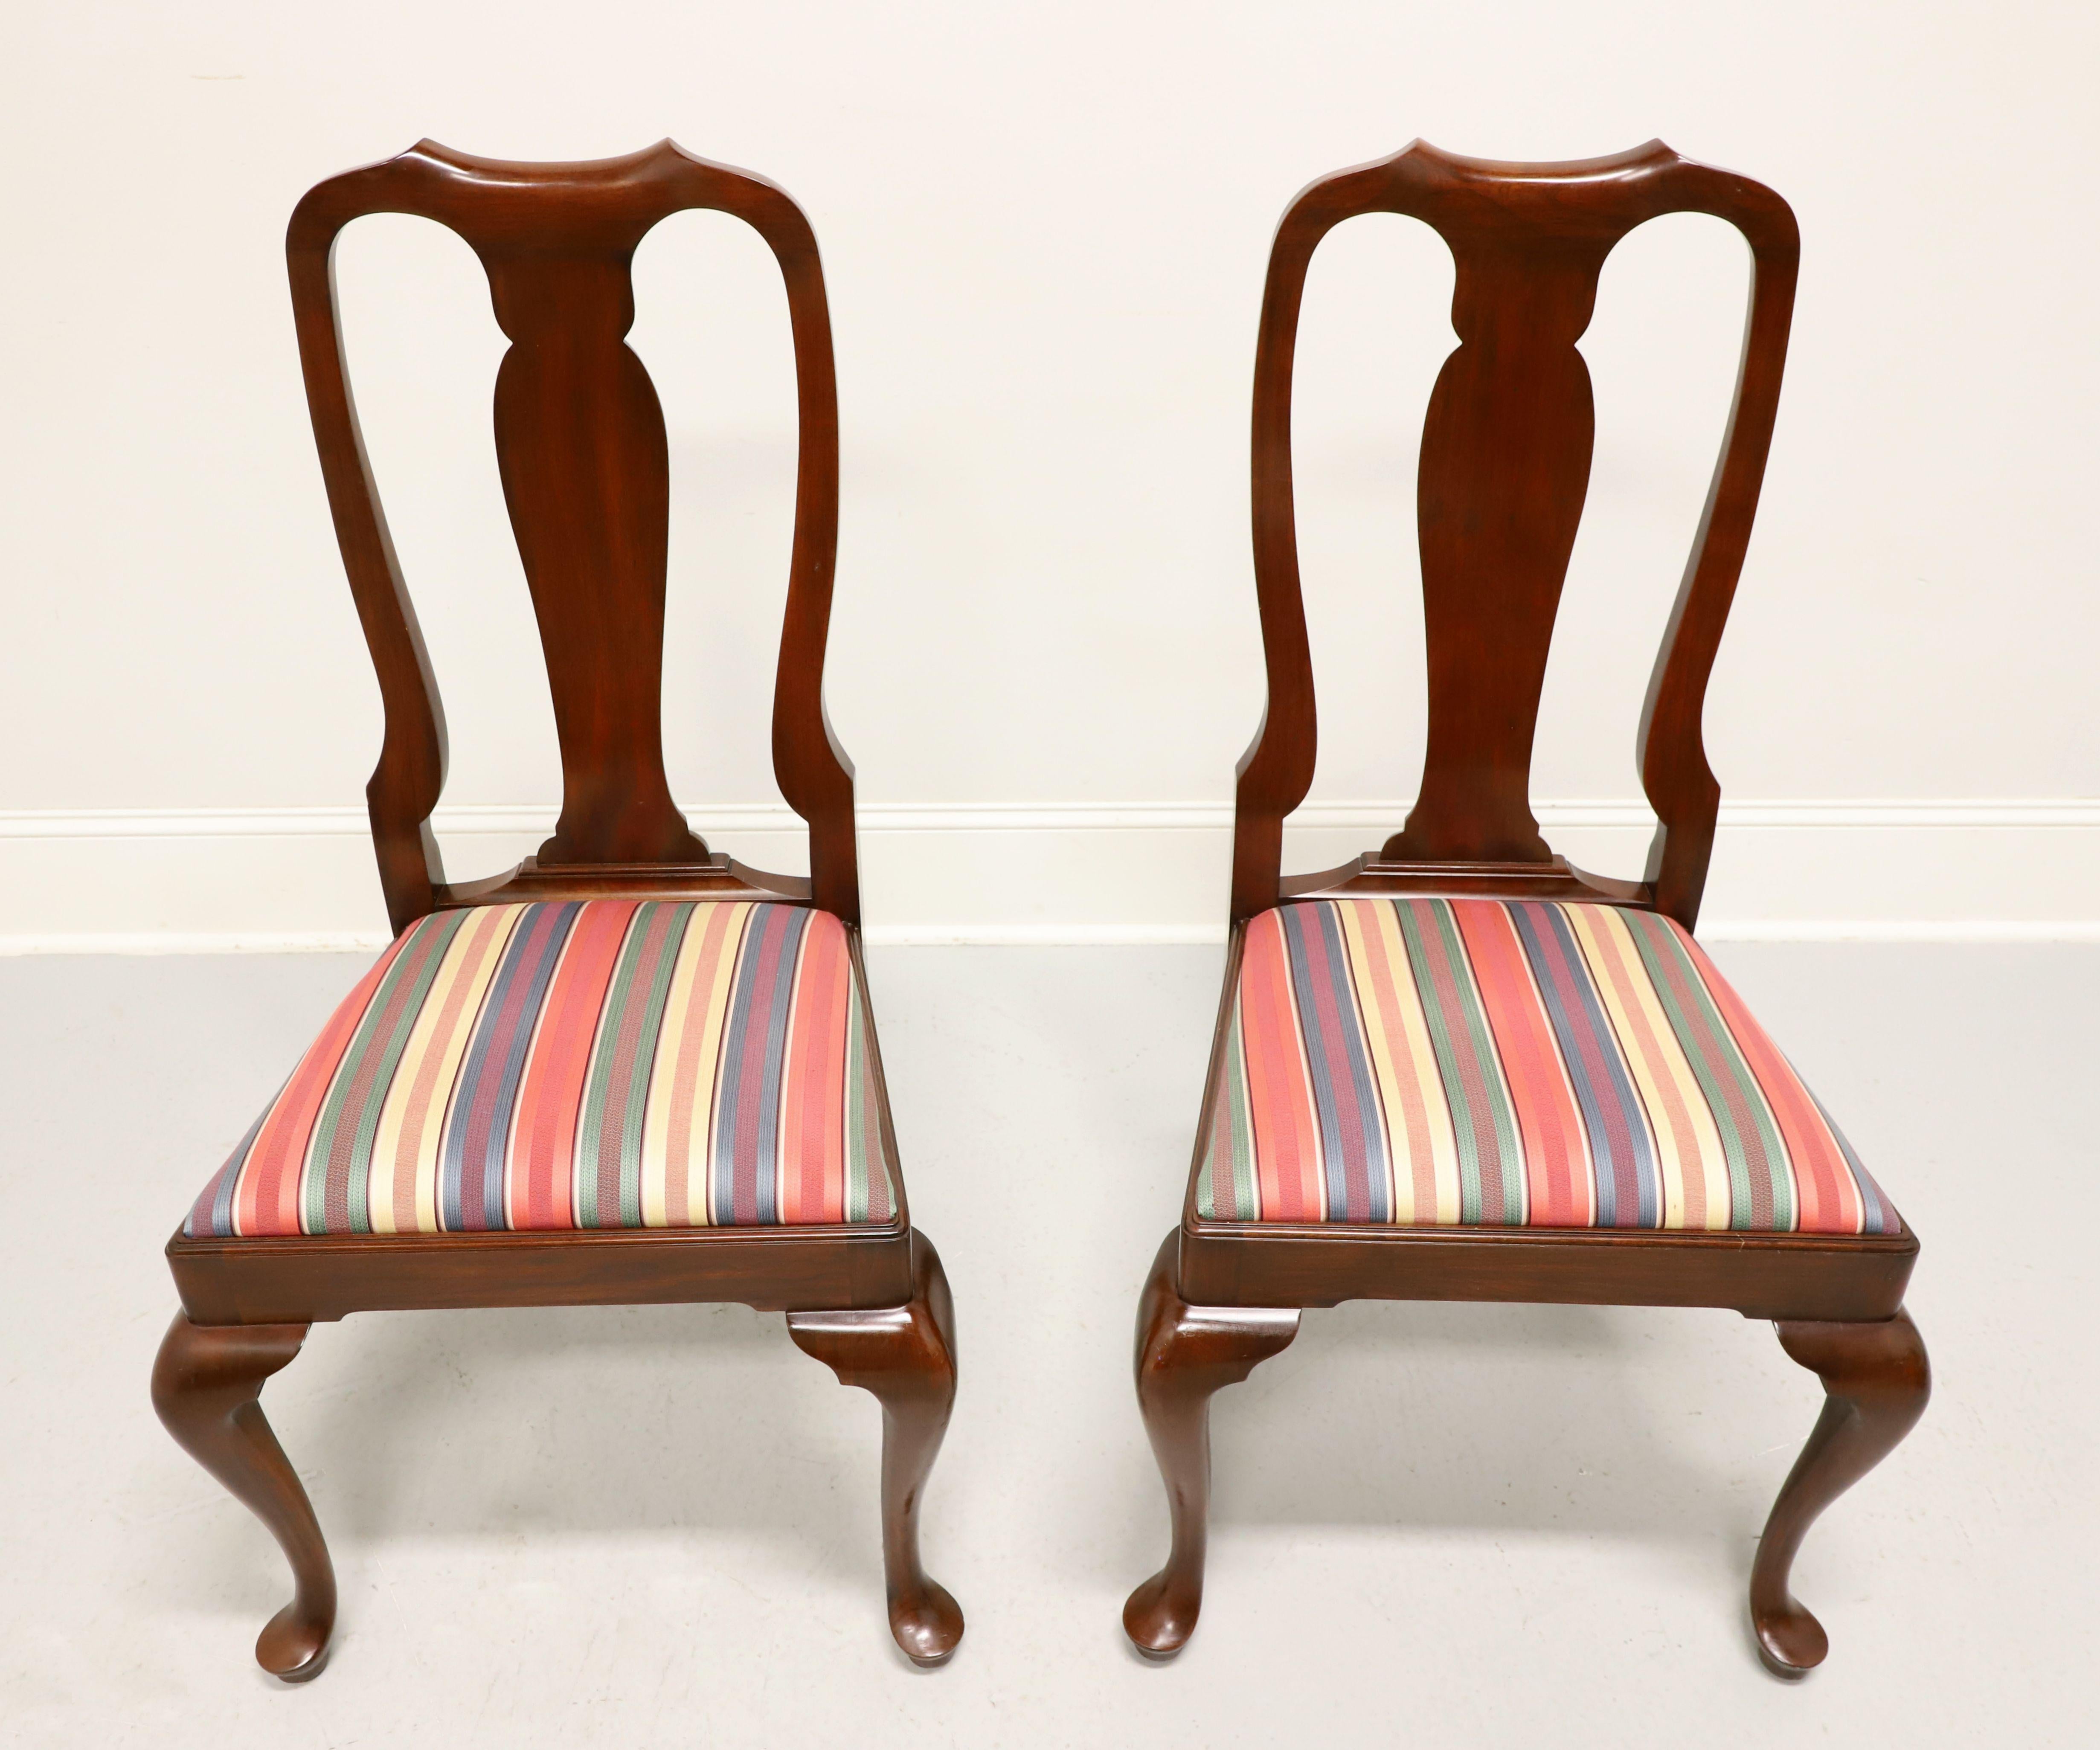 A pair of Queen Anne style dining side chairs by Henkel Harris, of Winchester, Virginia, USA. Solid wild black cherry wood, carved center backrest, upholstered seat in a multi-color stripe patterned fabric, solid apron, cabriole legs and pad feet.